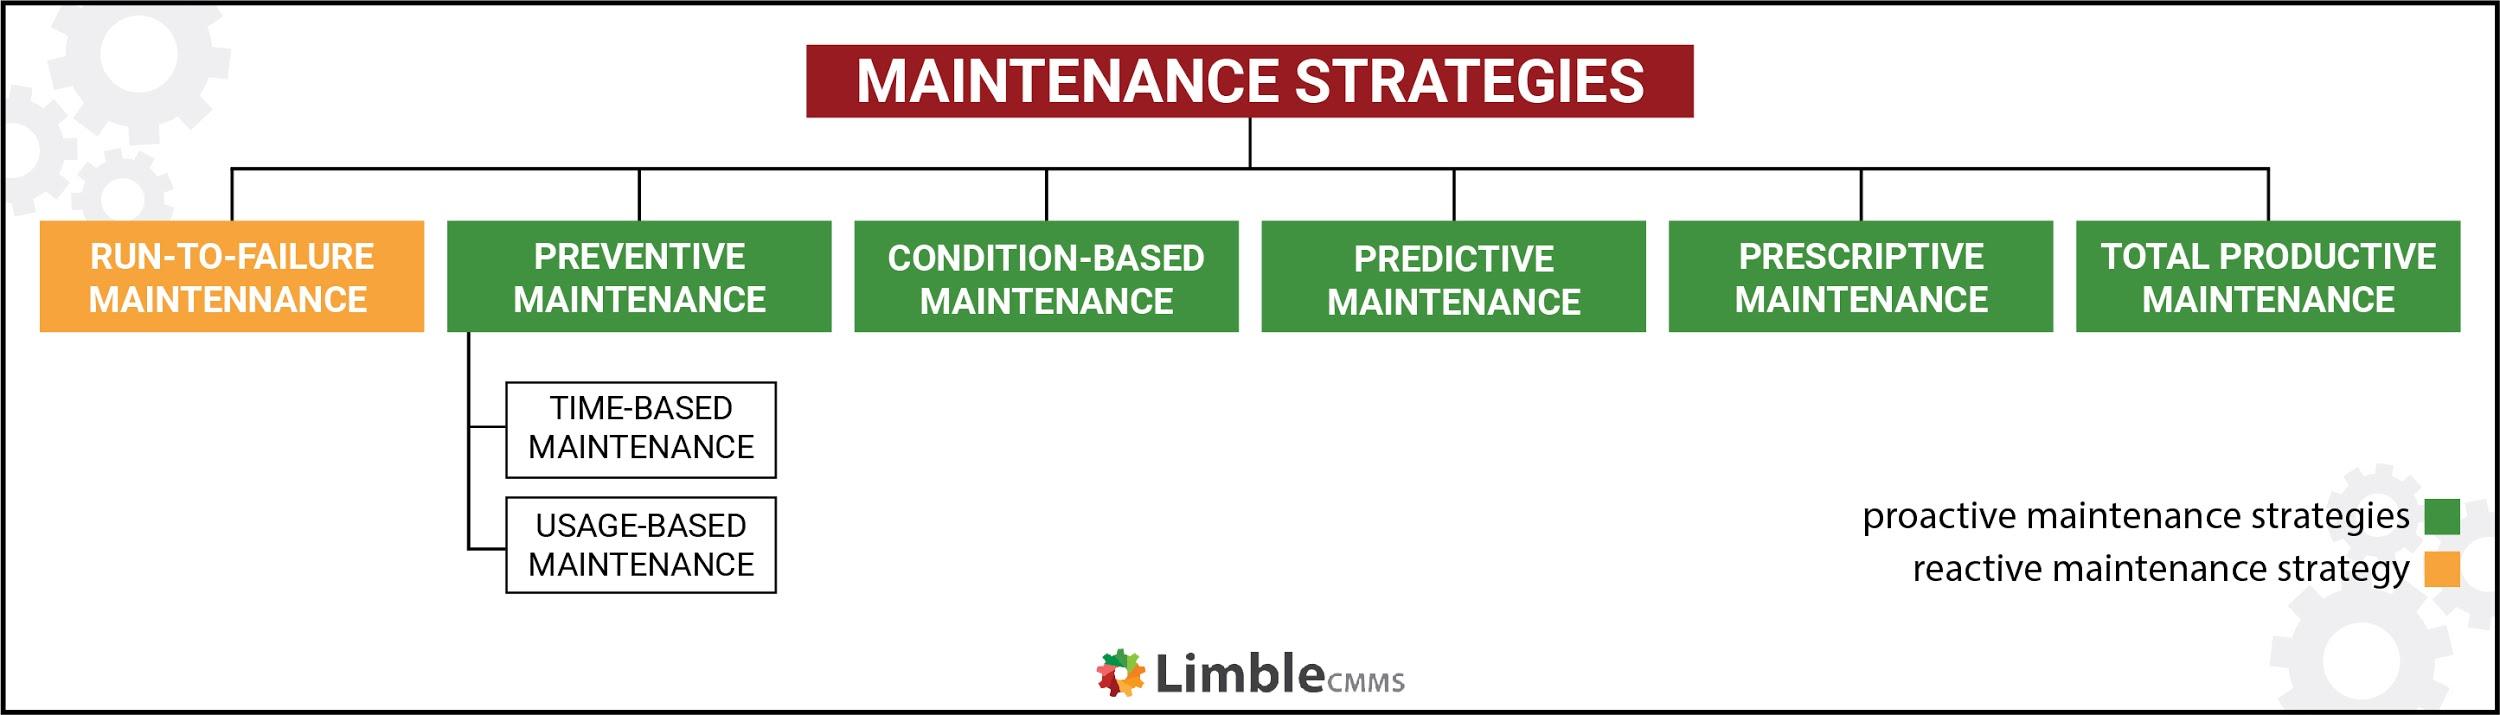 hierarchy of maintenance strategies